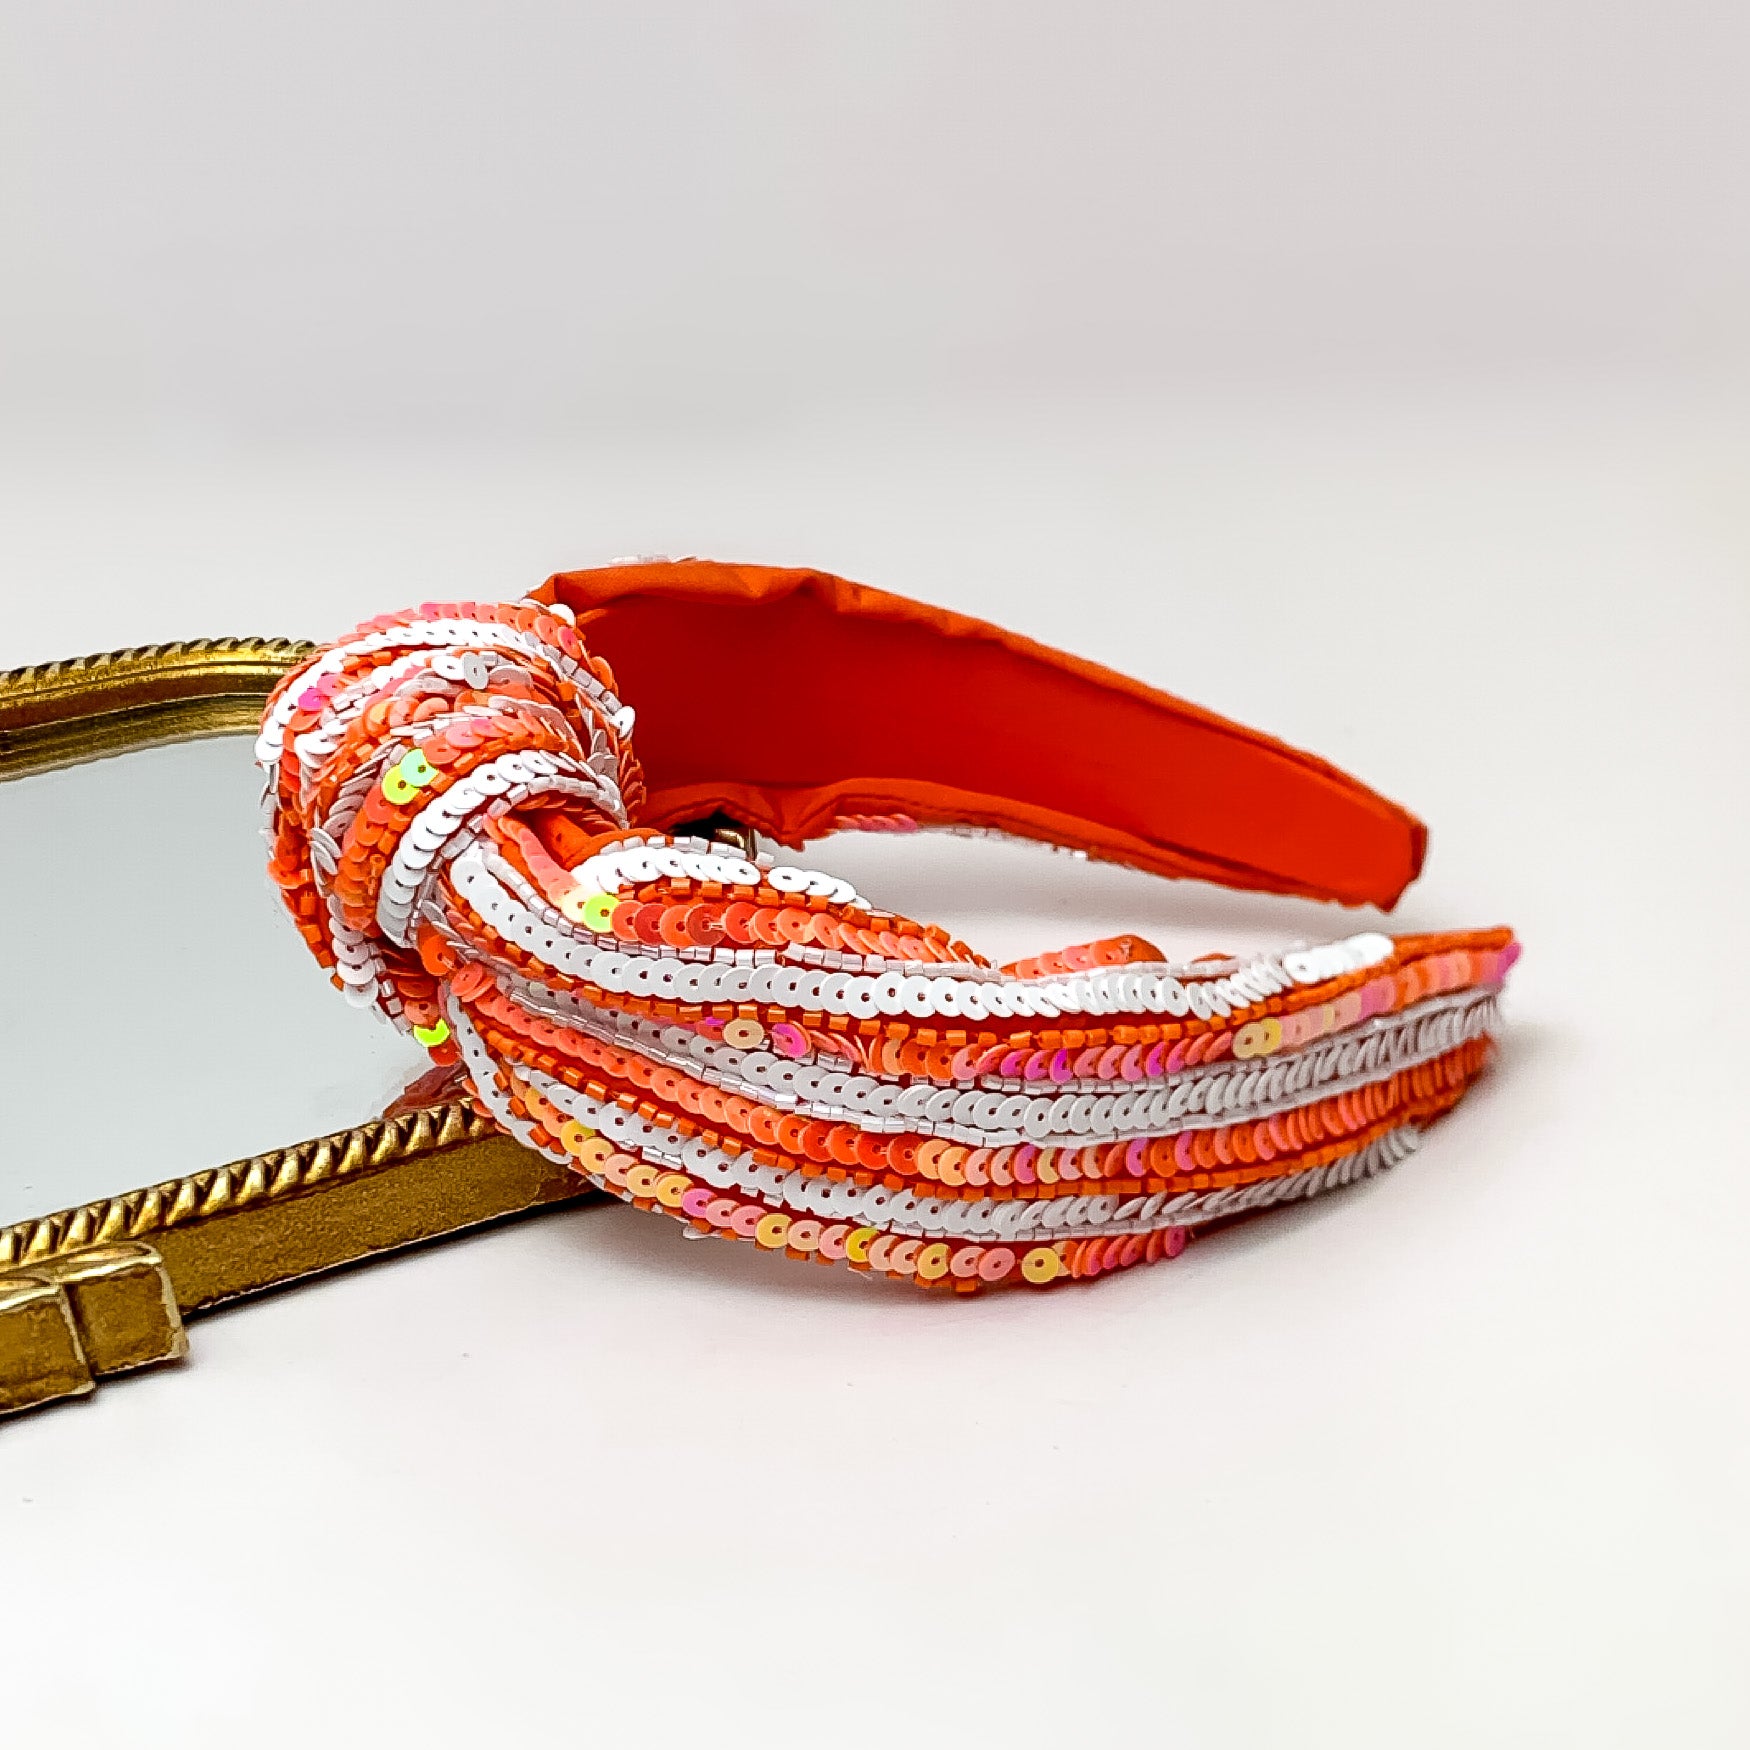 Striped Large Knot Headband in Orange and White - Giddy Up Glamour Boutique